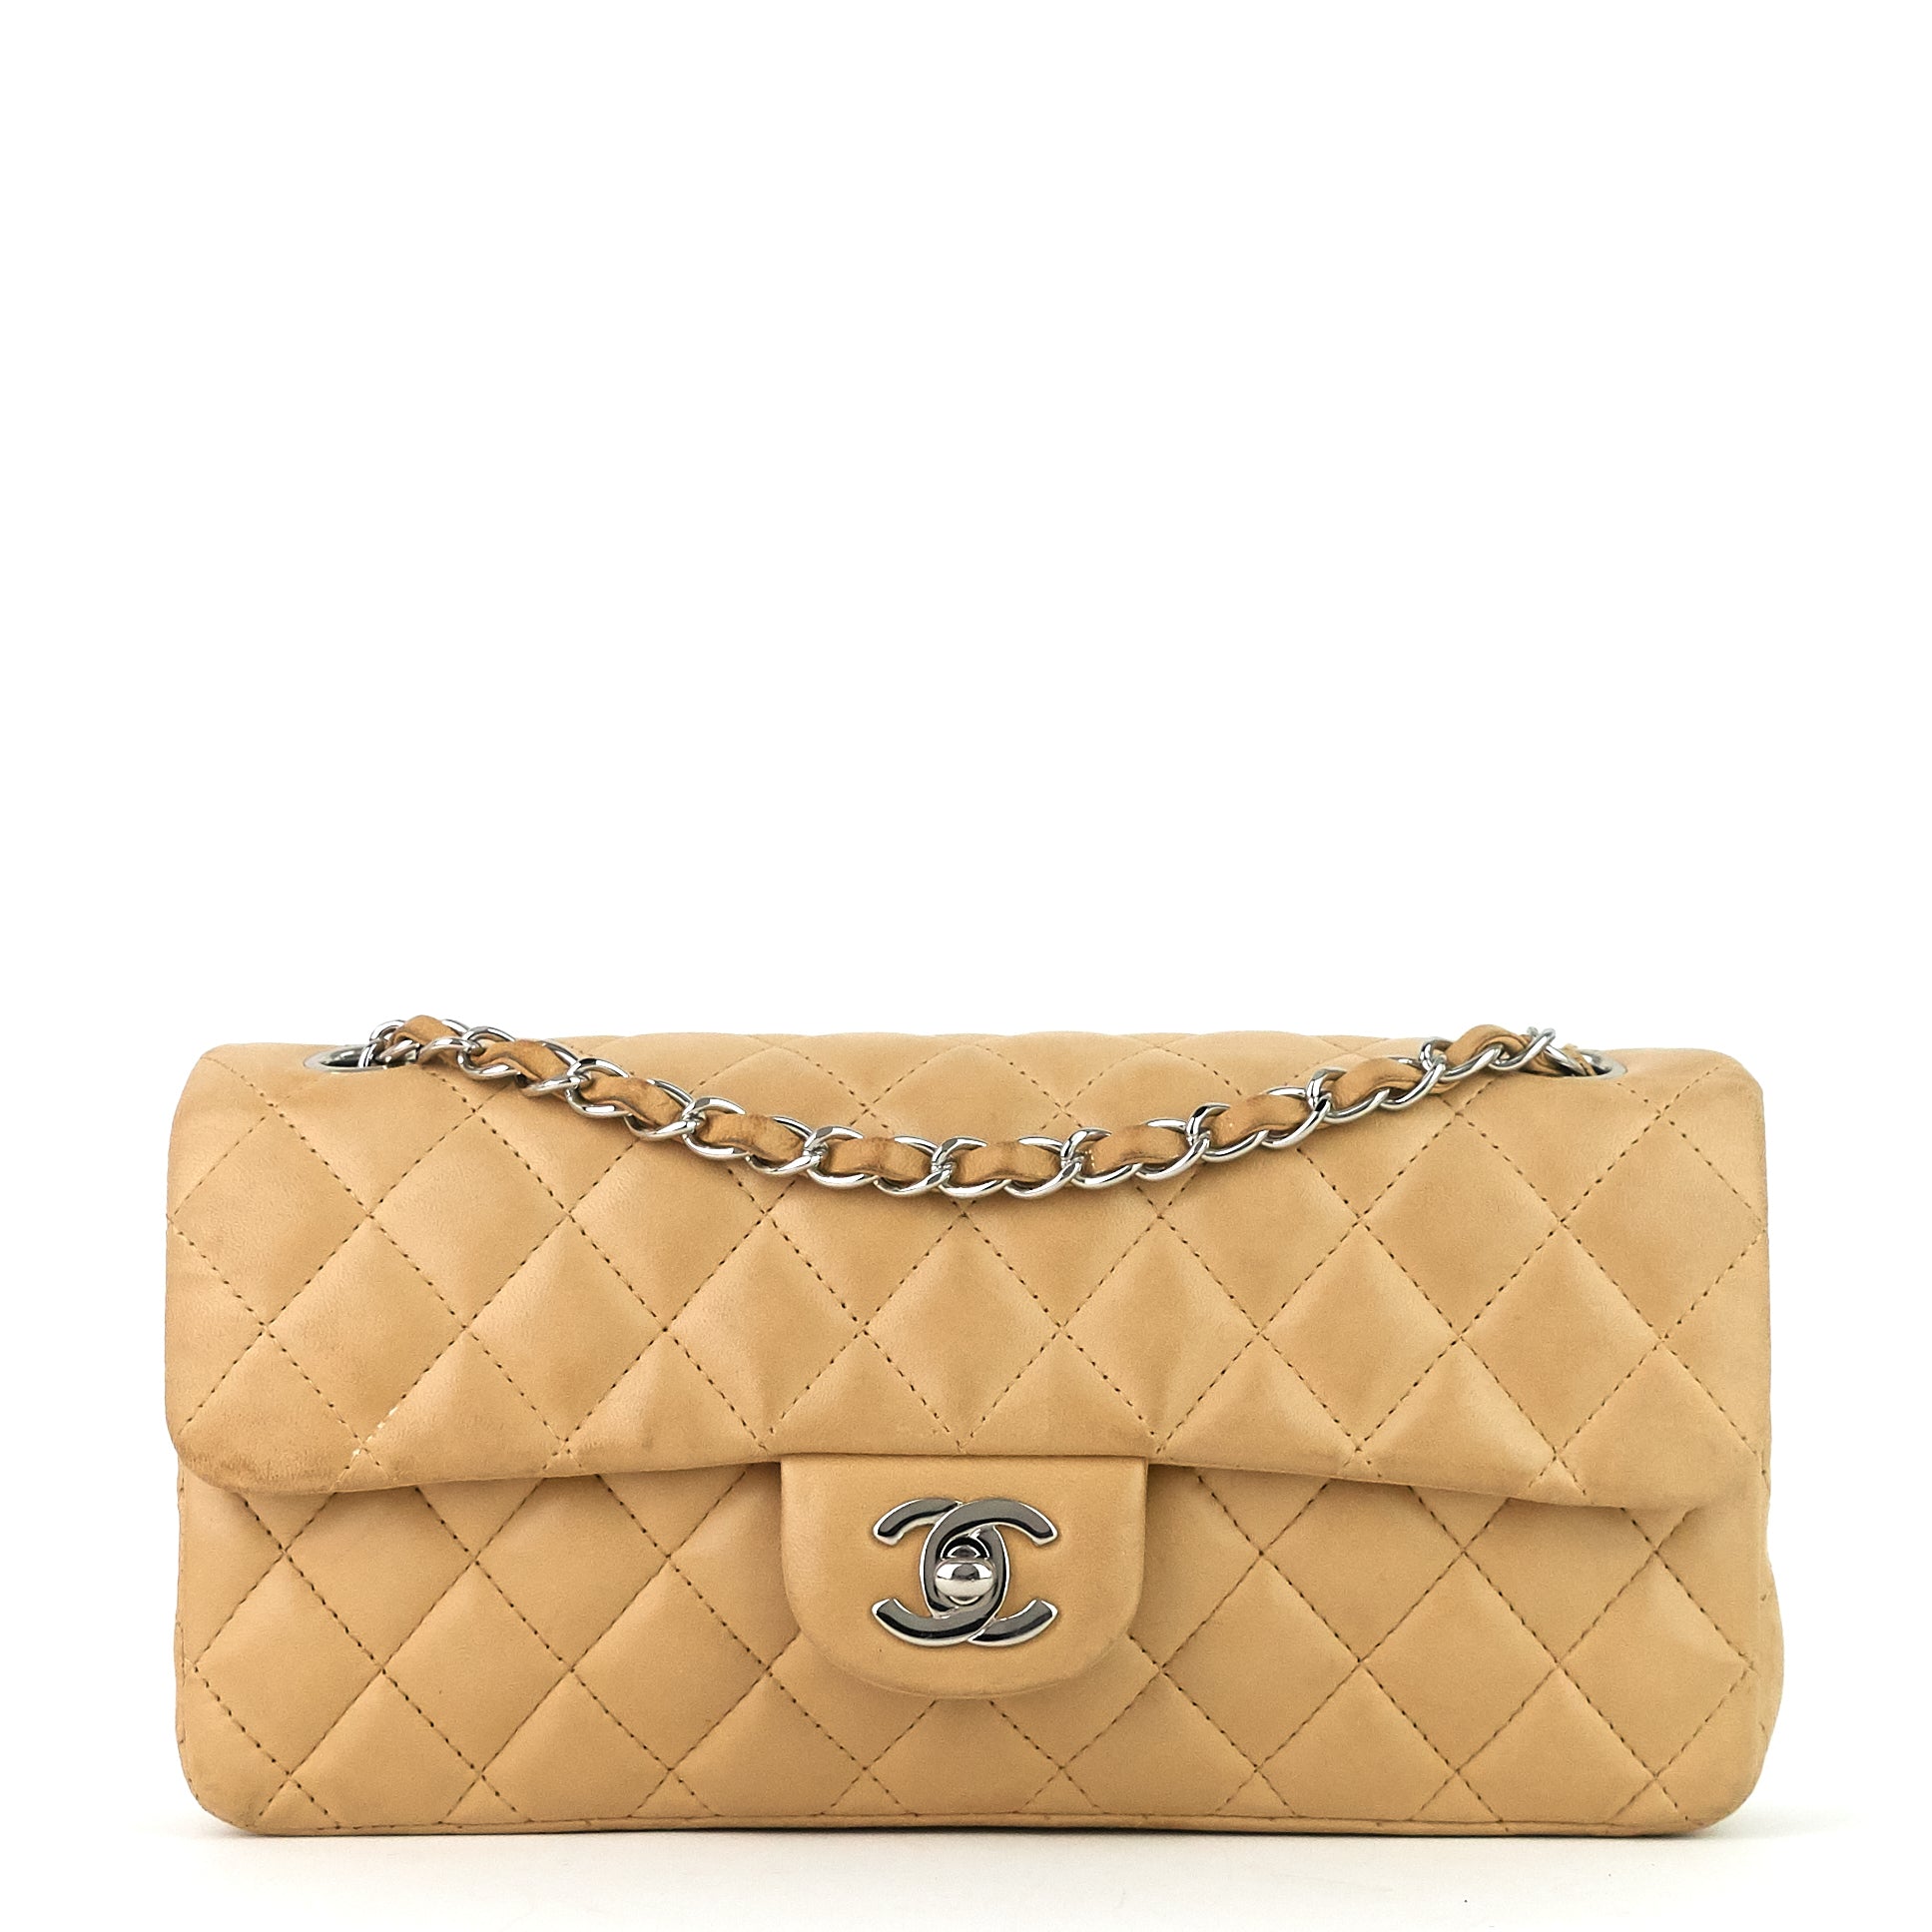 Chanel Bags Australia  Second Hand Used  PreOwned